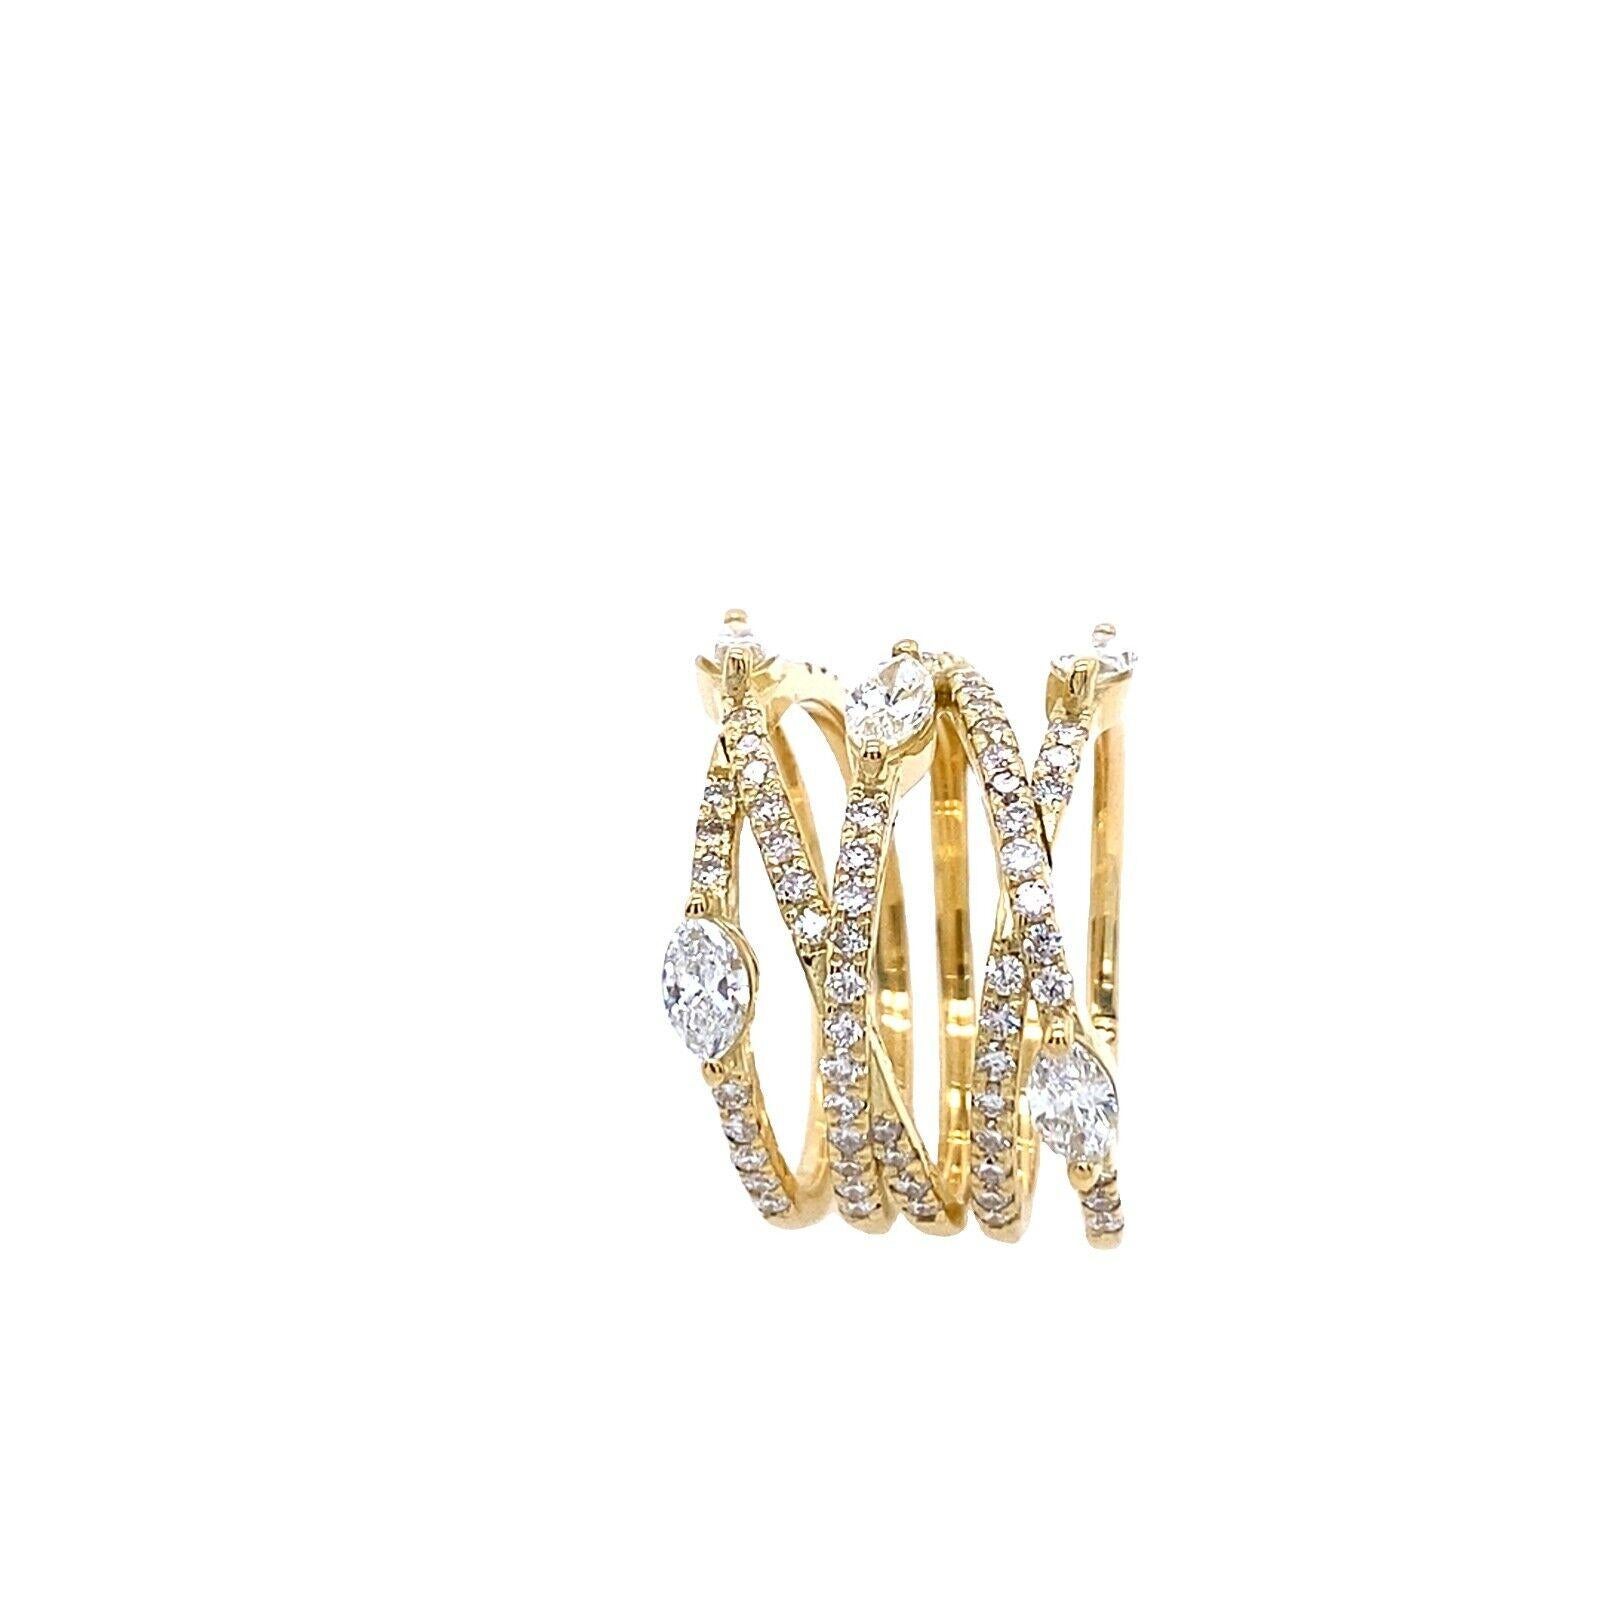 An exquisite diamond design 5-row dress ring crisscross,
in an 18ct yellow gold band, is set with a total of 1.60ct diamonds. 
The band features 5 marquise cut diamonds & 72 round cut diamonds. 
Brand New Made by Jewellery Cave.
Total Diamond